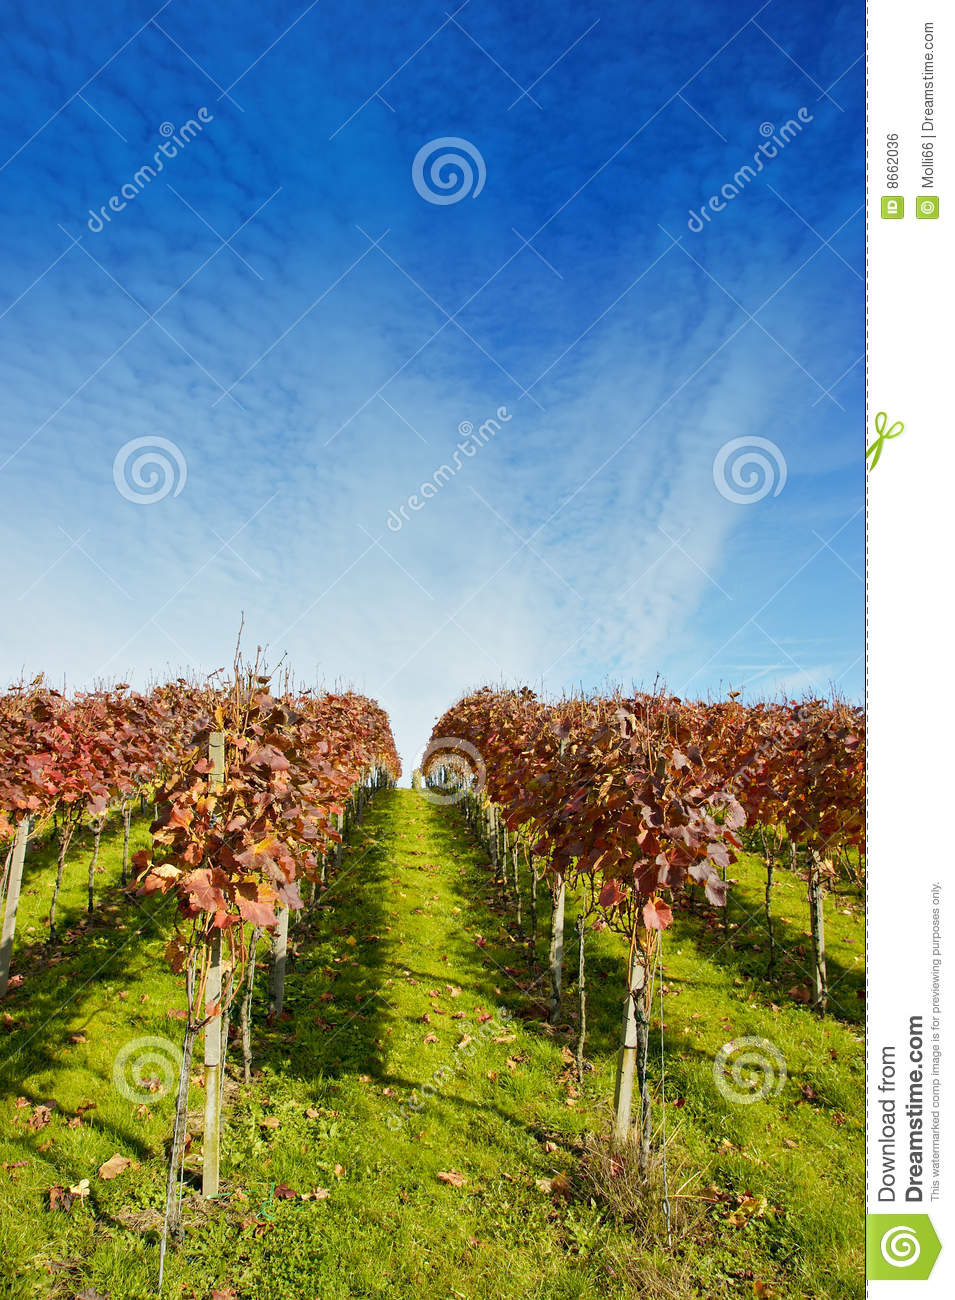 Vineyard In Late Summer Royalty Free Stock Image   Image  8662036